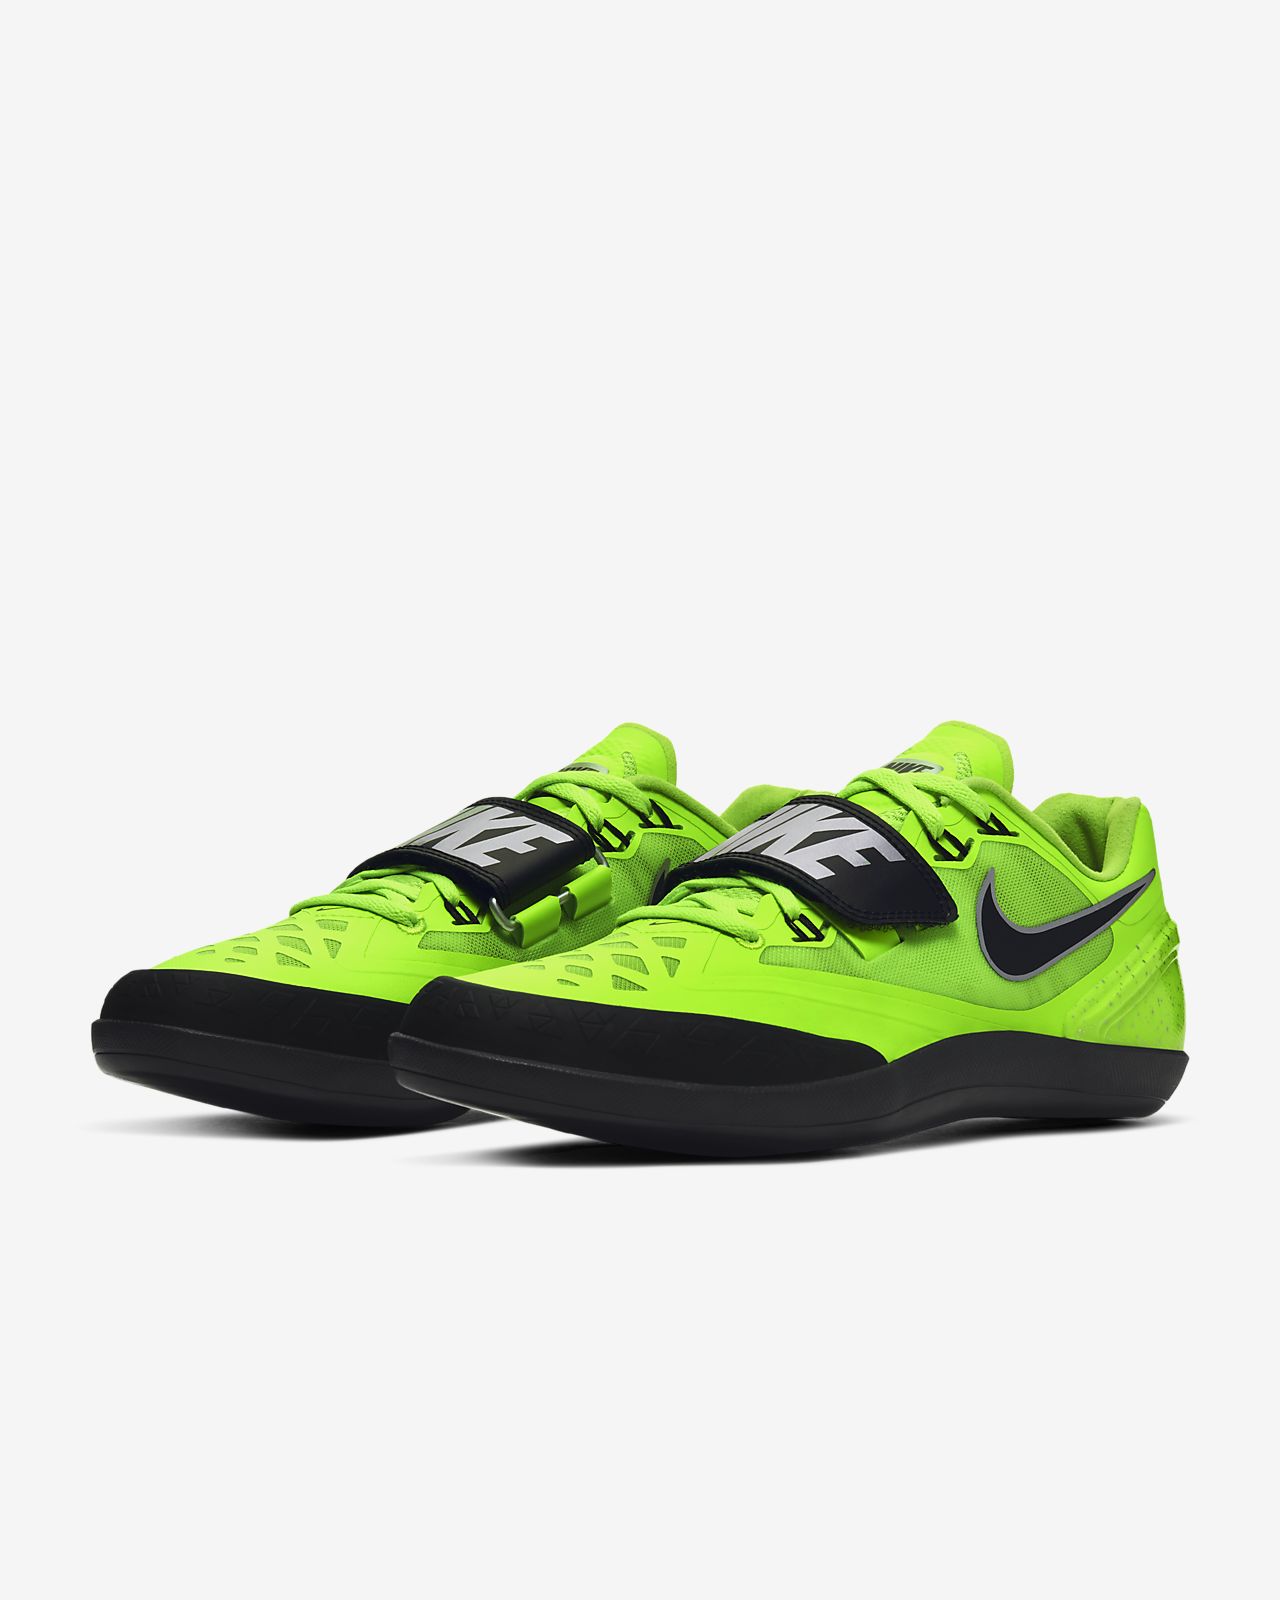 nike shot put and discus shoes off 56 